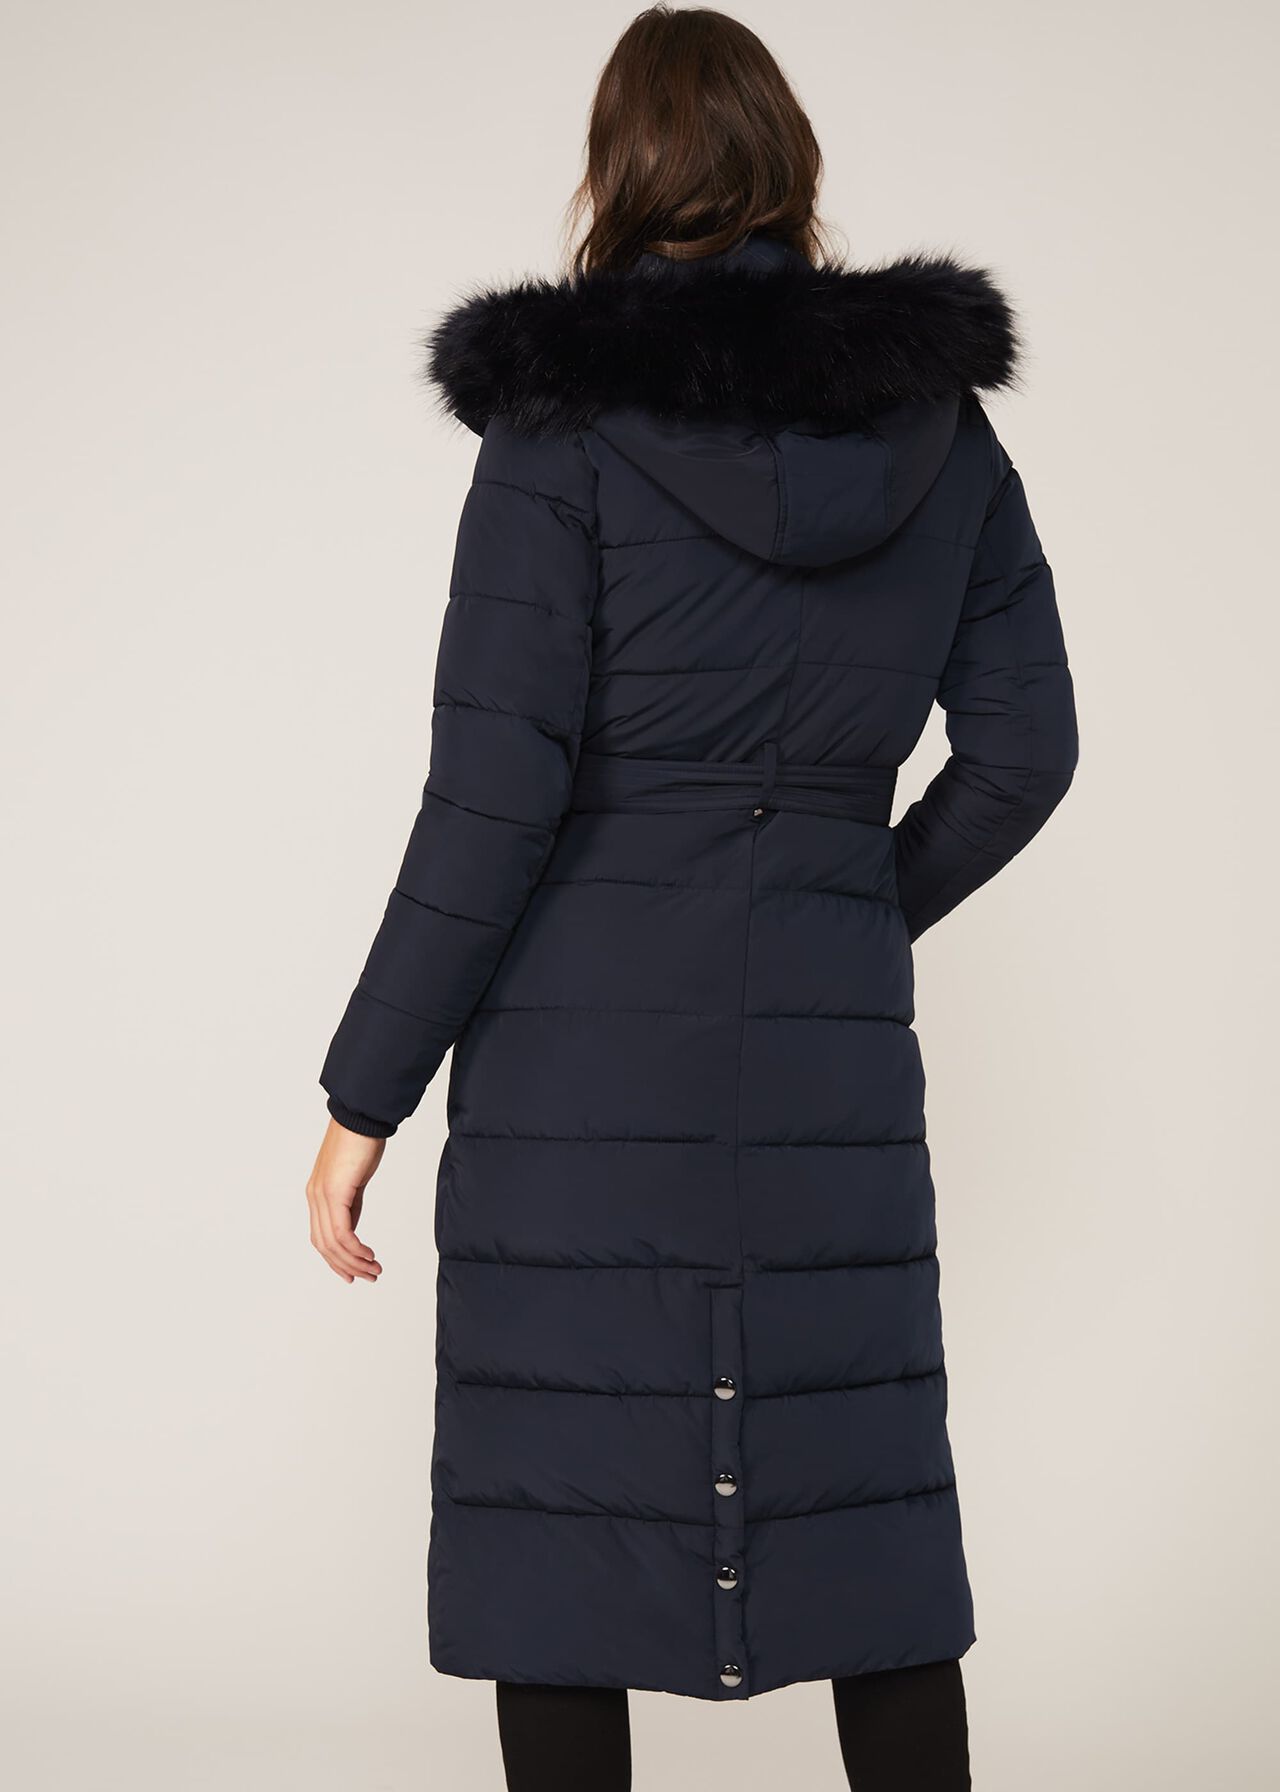 Mabel Maxi Puffer Coat | Phase Eight